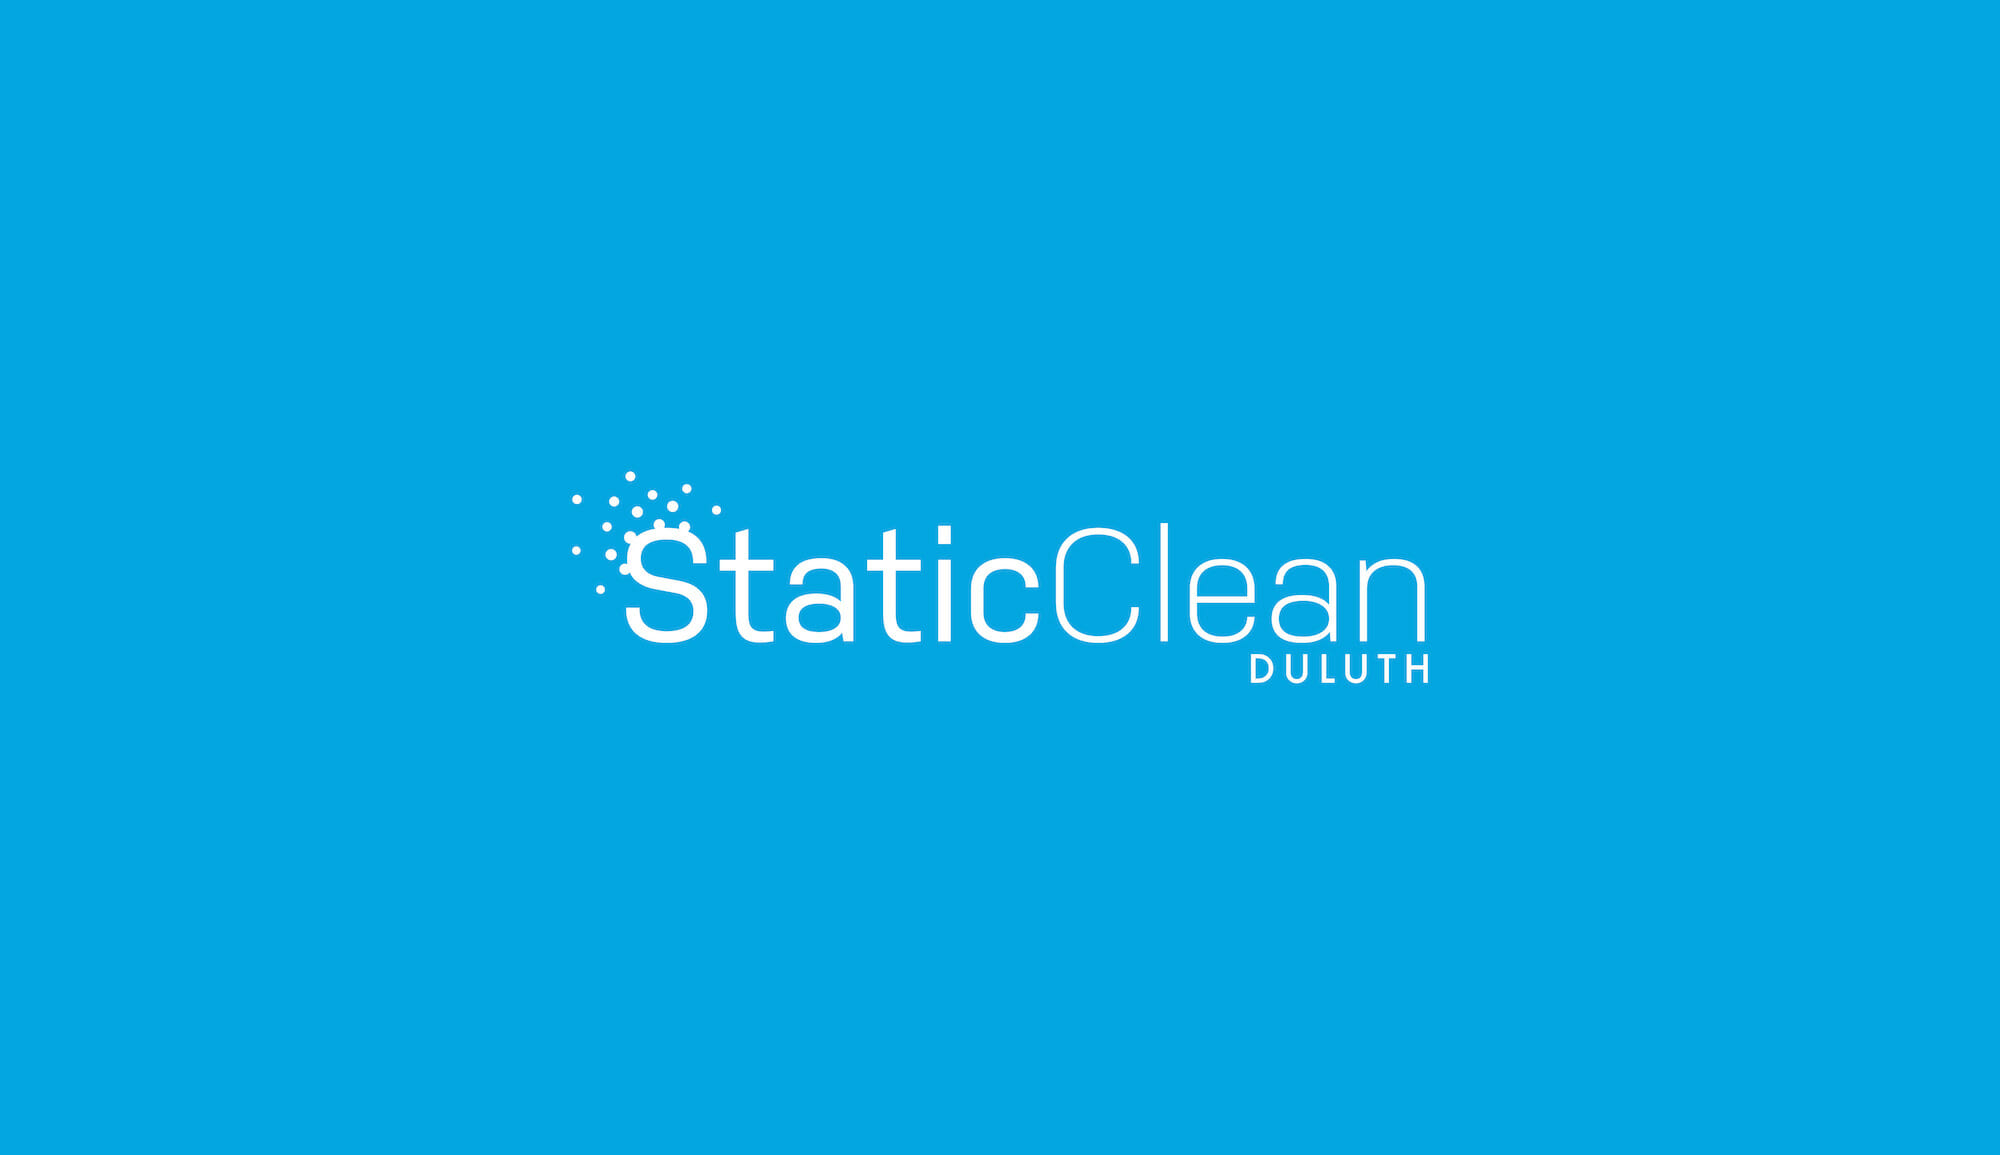 Static Clean Duluth Name and Logo Design, created by Šek Design Studio